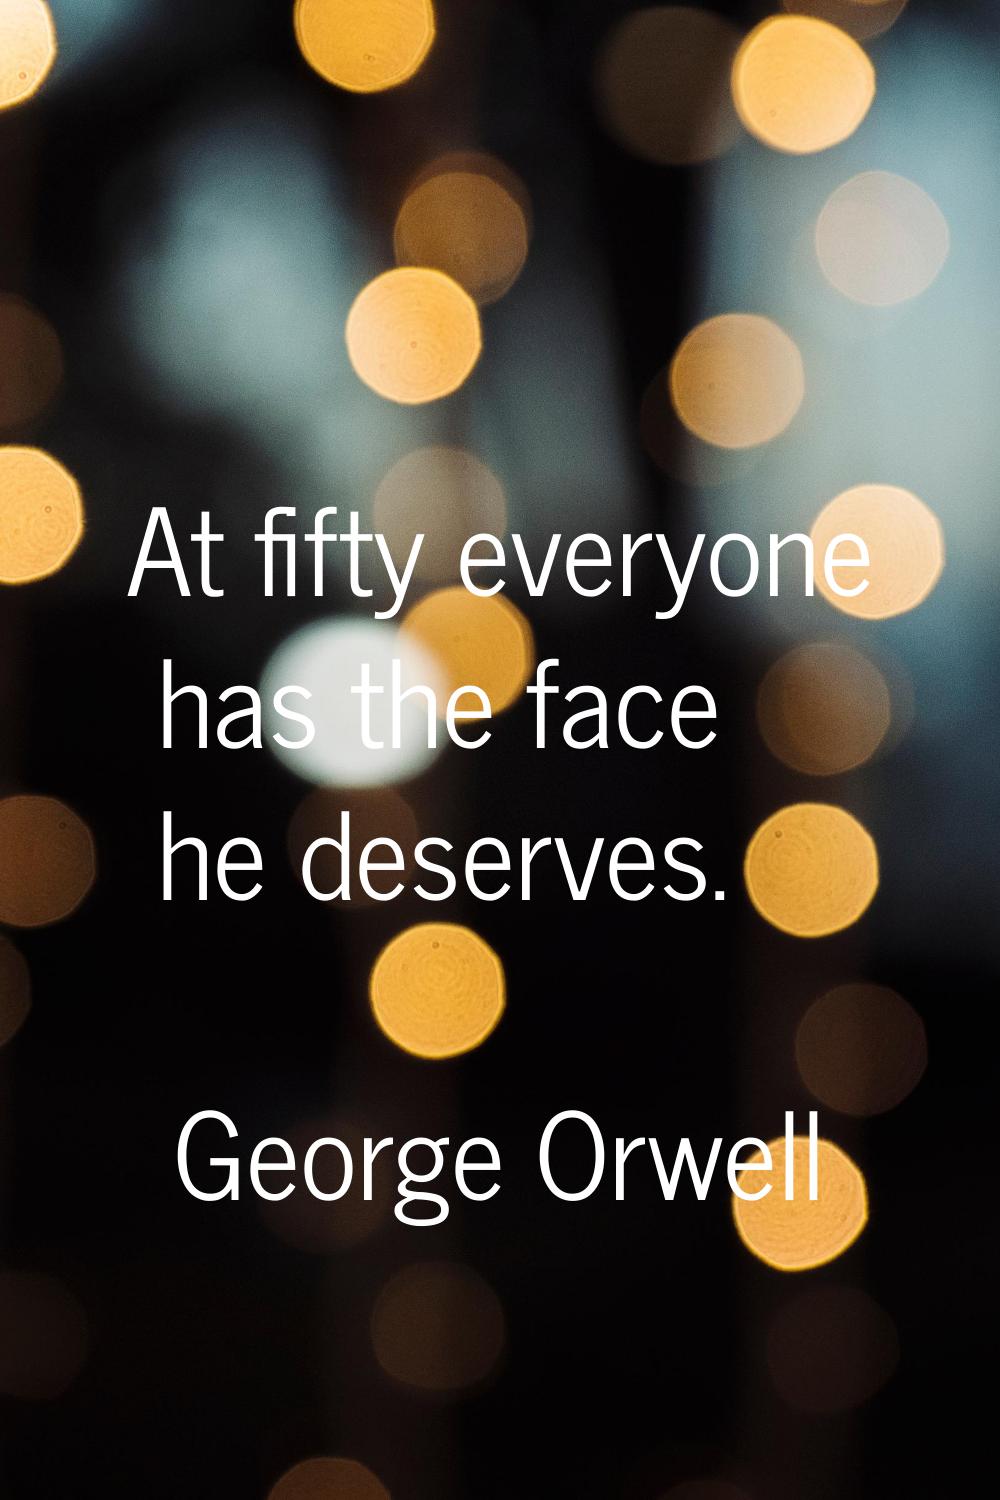 At fifty everyone has the face he deserves.